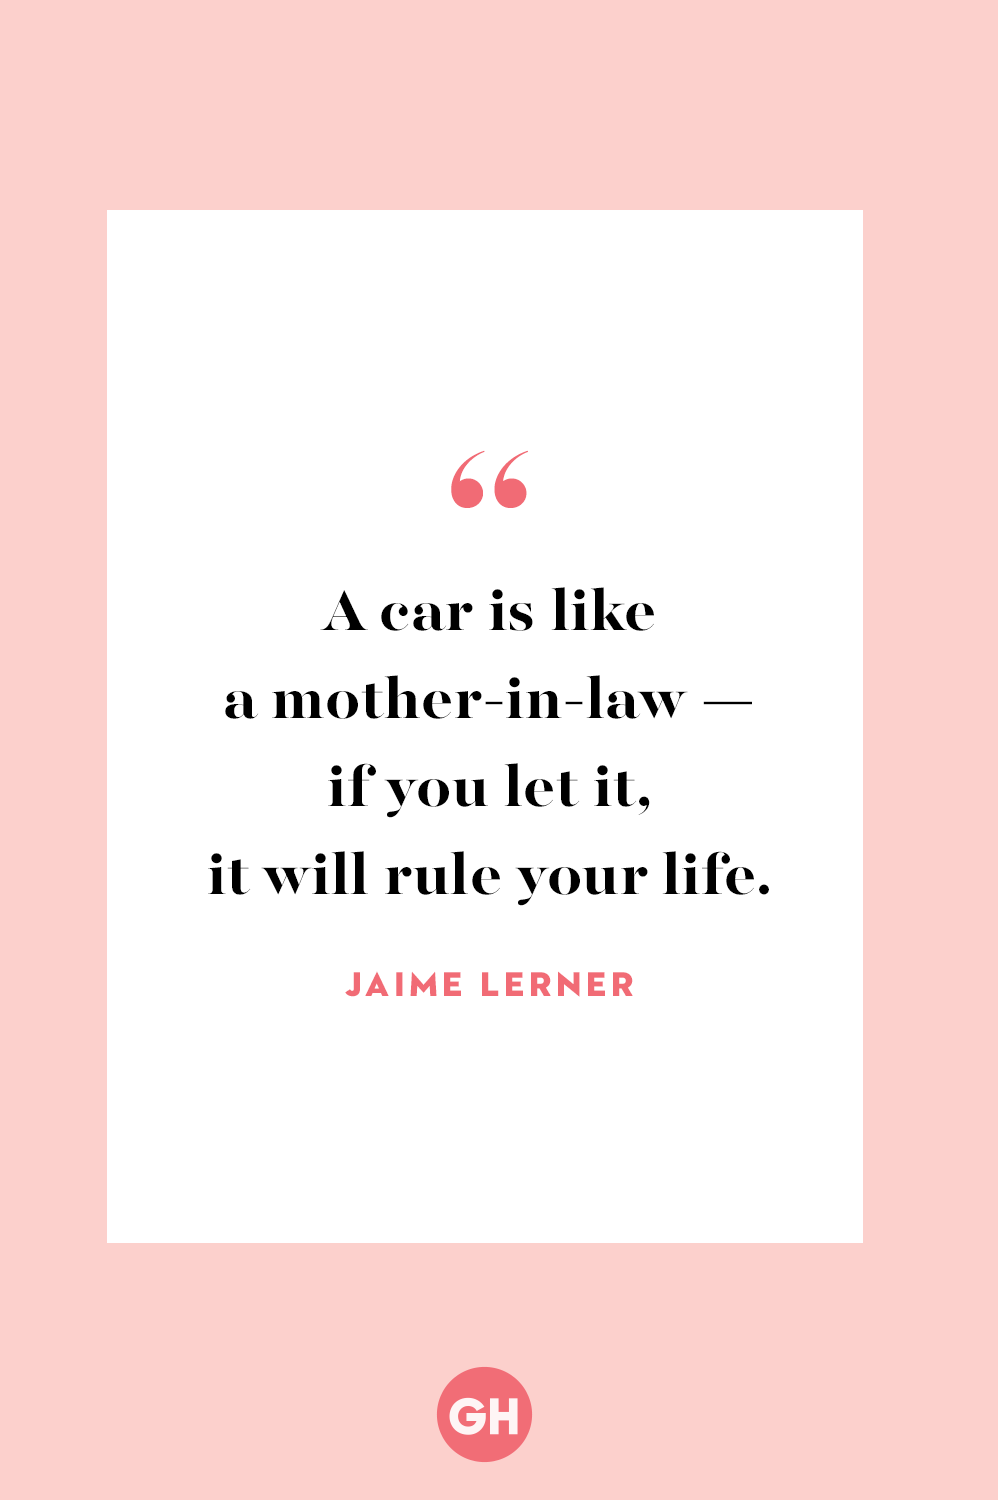 mother in law birthday quotes